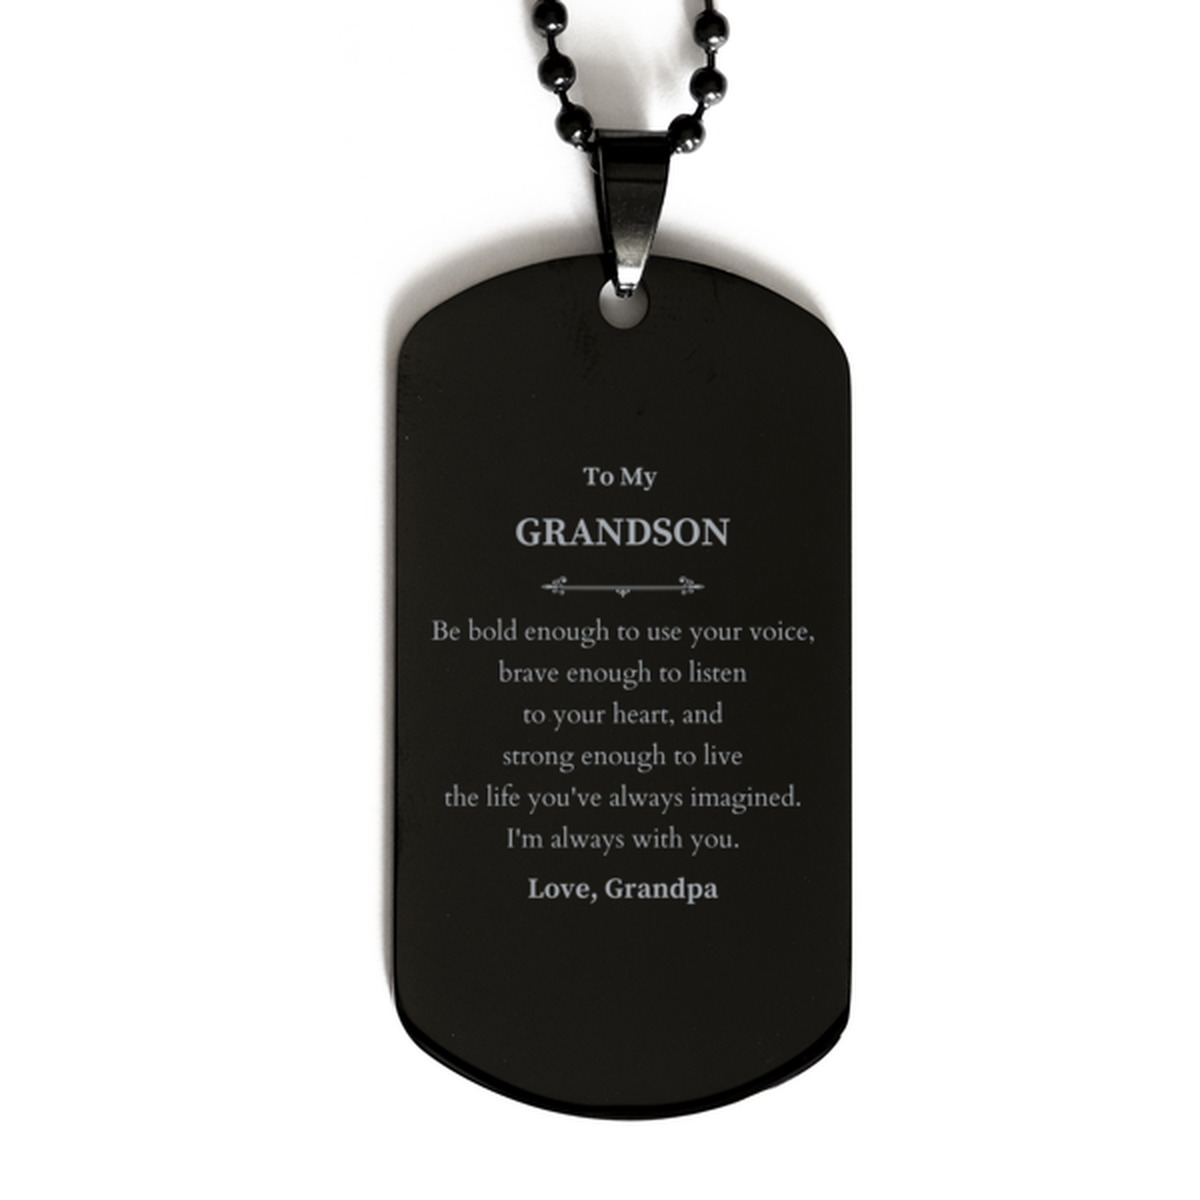 Keepsake Grandson Black Dog Tag Gift Idea Graduation Christmas Birthday Grandson from Grandpa, Grandson Be bold enough to use your voice, brave enough to listen to your heart. Love, Grandpa